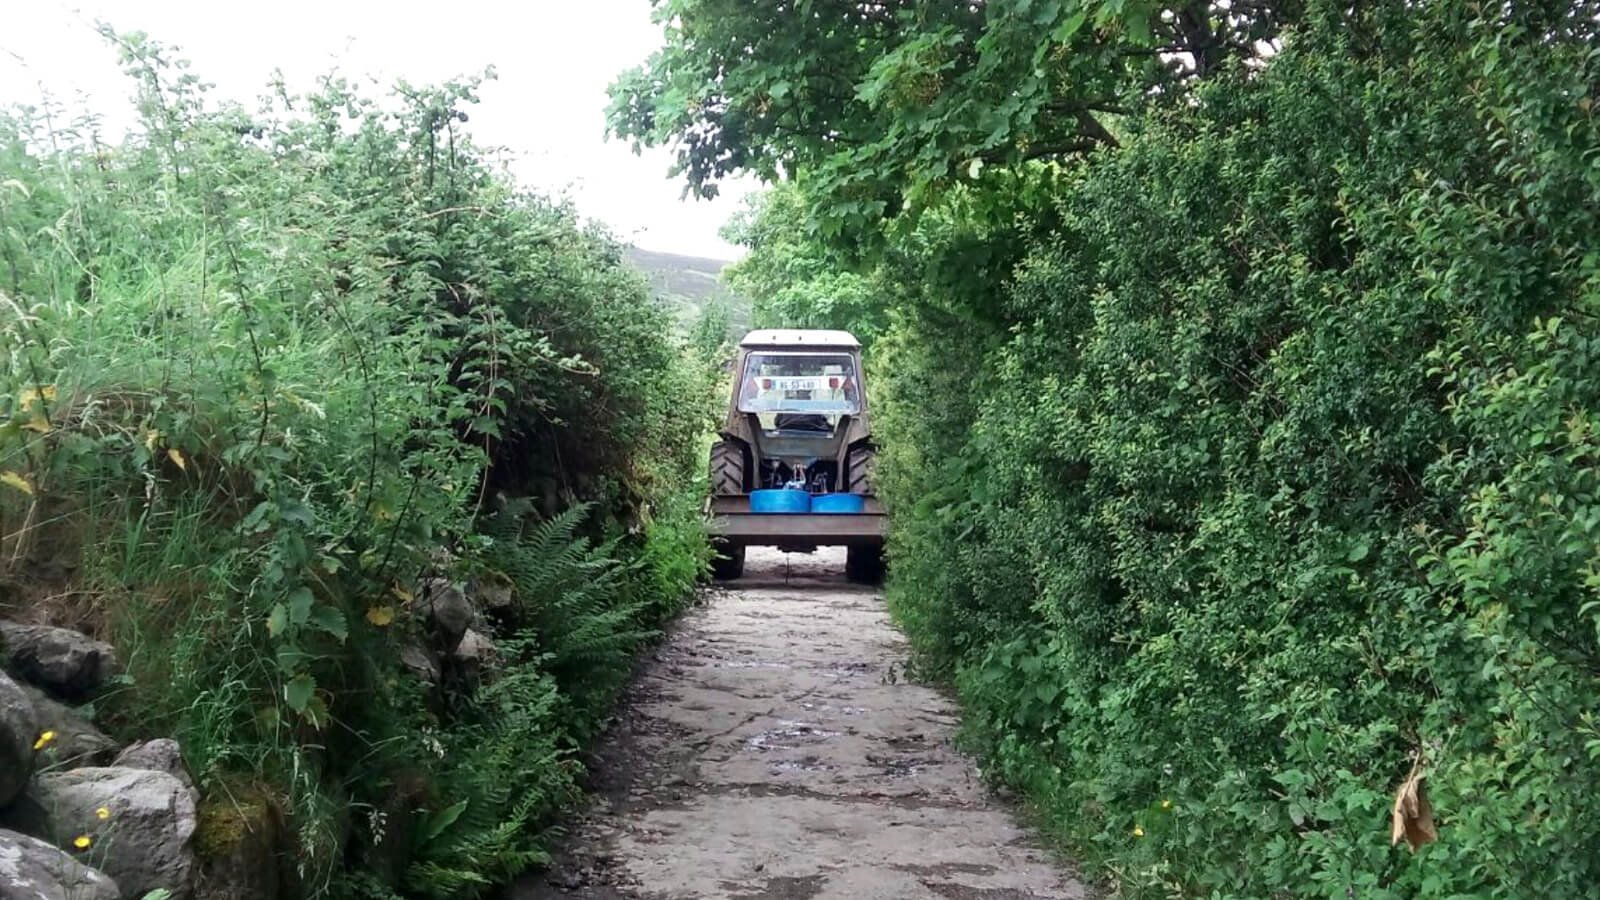 Tractor on a narrow lane in Ireland with high hedgerows on both sides